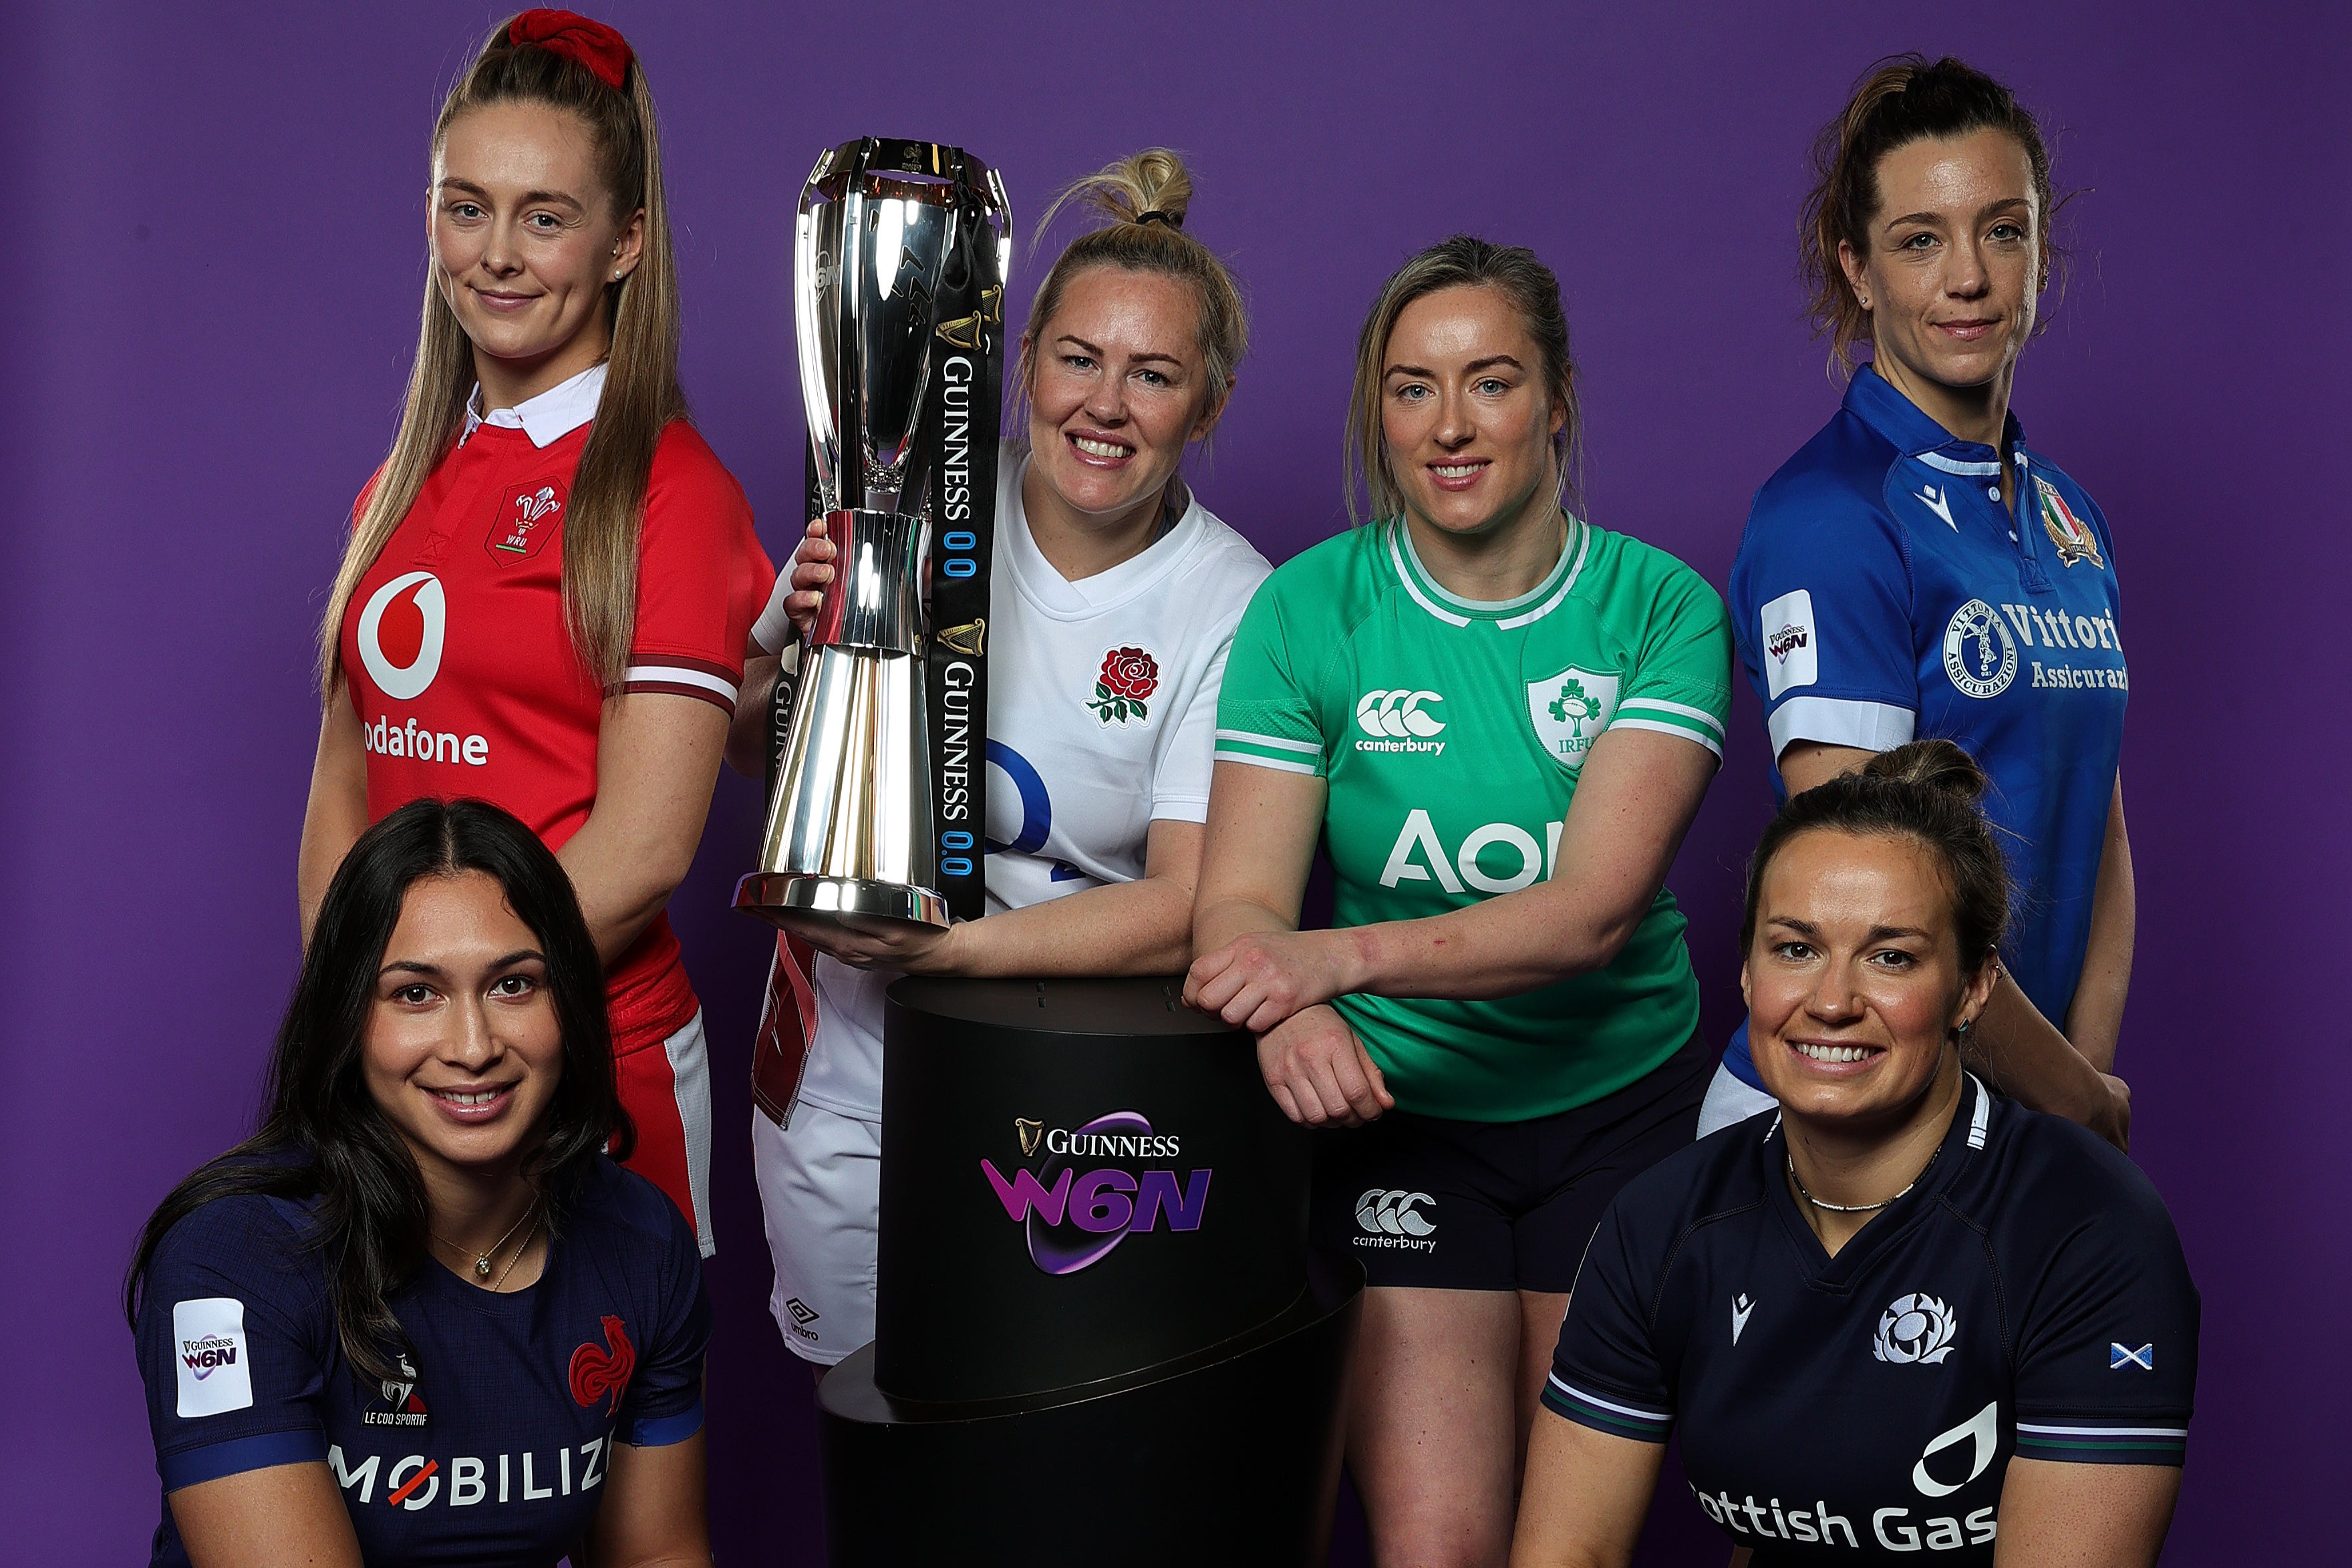 The Women’s Six Nations follows the men’s tournament and promises plenty of intrigue